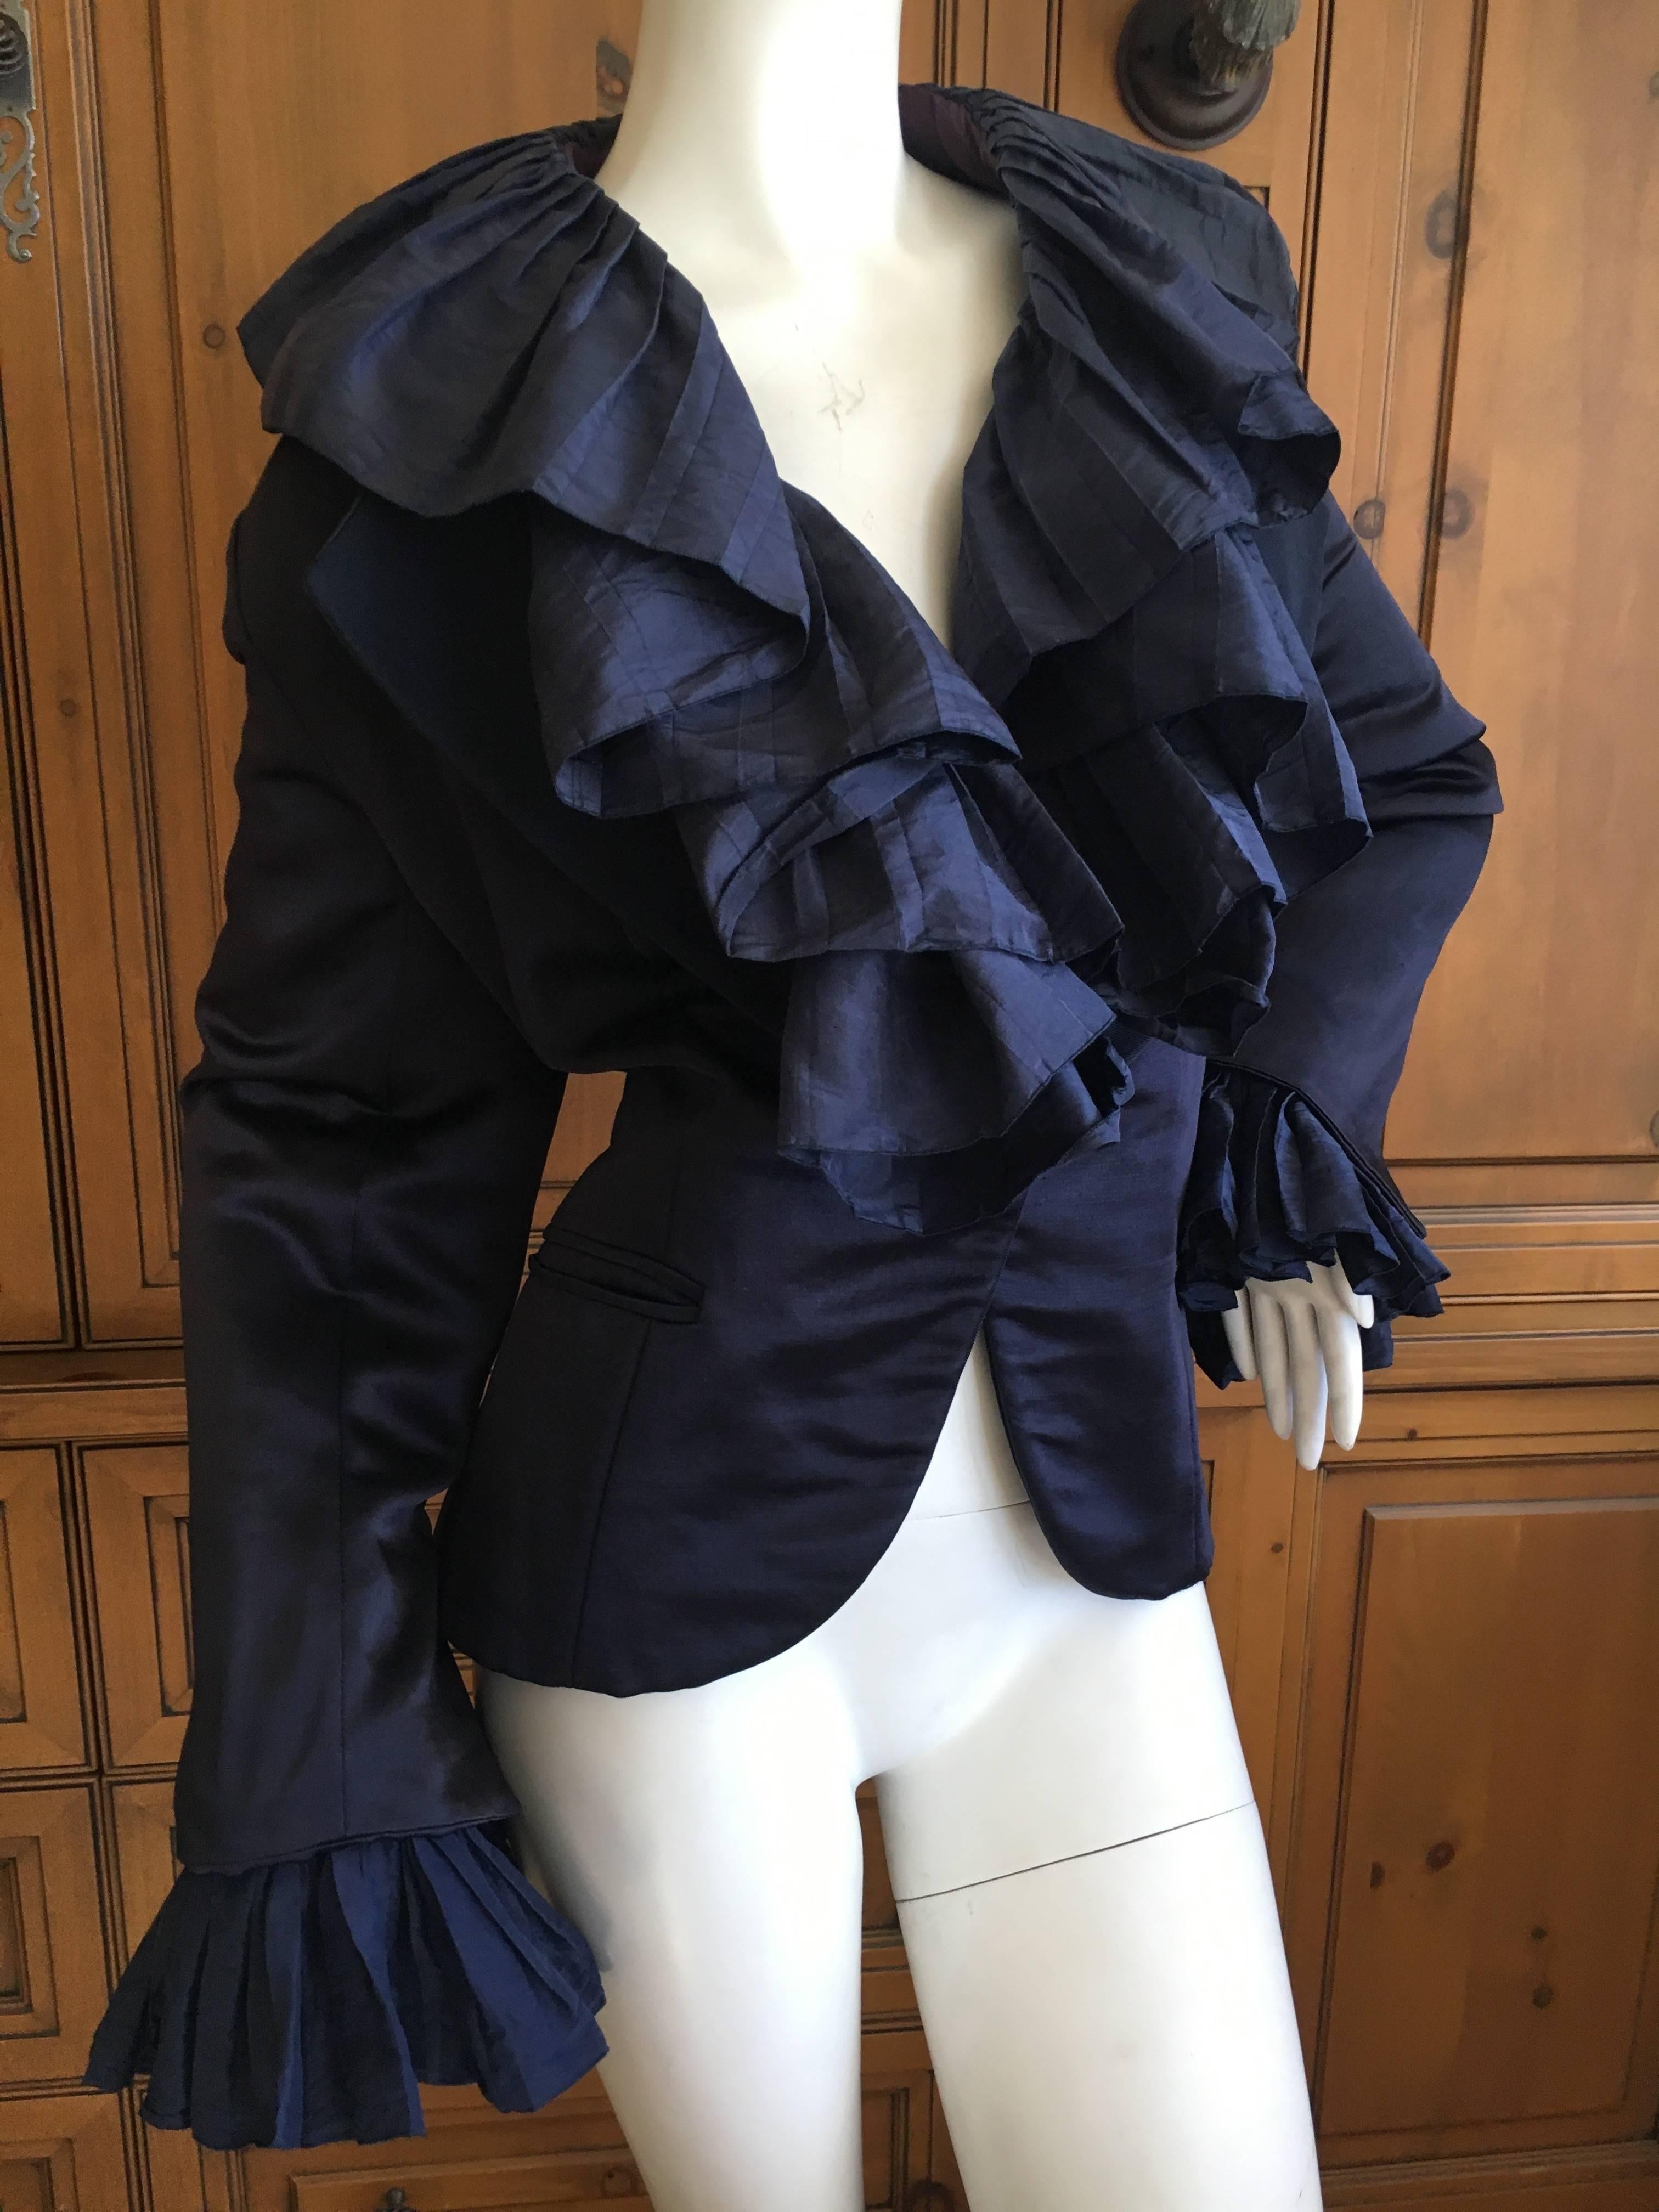 Christian Dior Numbered Demi Couture Ruffled Silk Jacket by Gianfranco Ferre.
Dark navy blue, with exaggerated ruffles on the collar and cuffs, so Ferre.
Runs quite large.
Bust 44